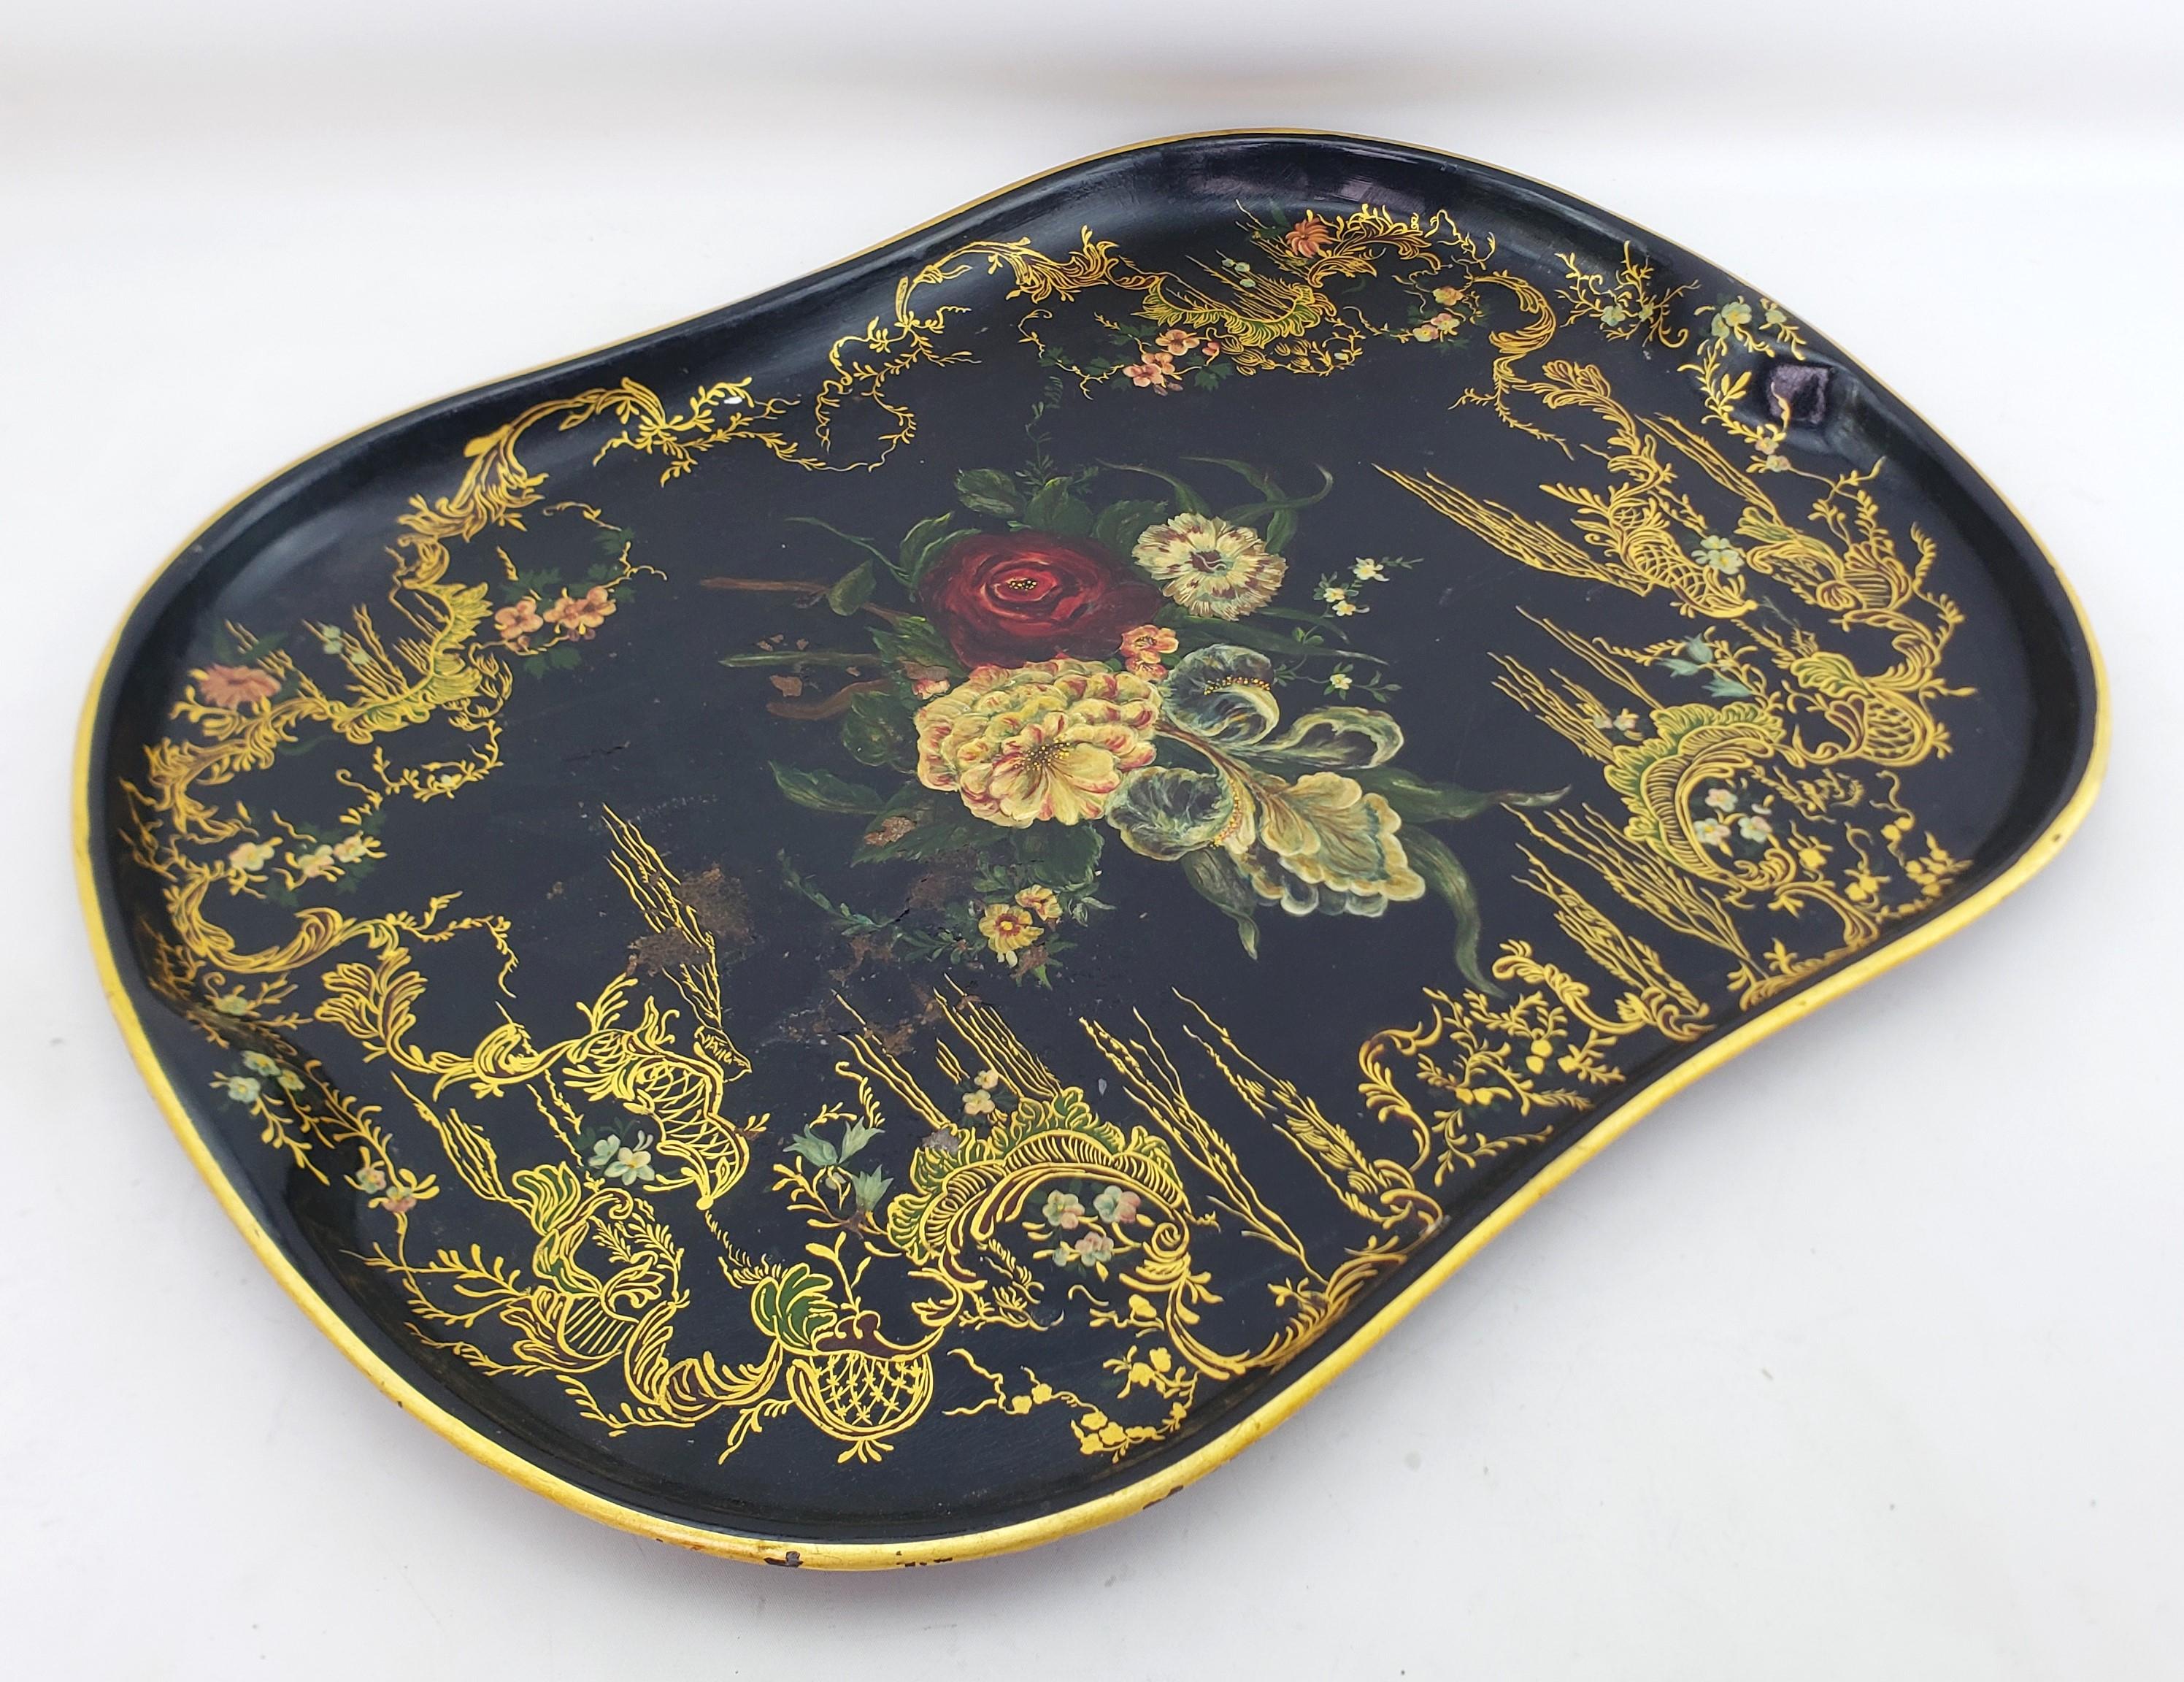 This huge antique serving tray is unsigned, but presumed to have originated from England and date to approximately 1880 and done in the period Victorian style. The tray is composed of pressed steel with and black background with an elaborate